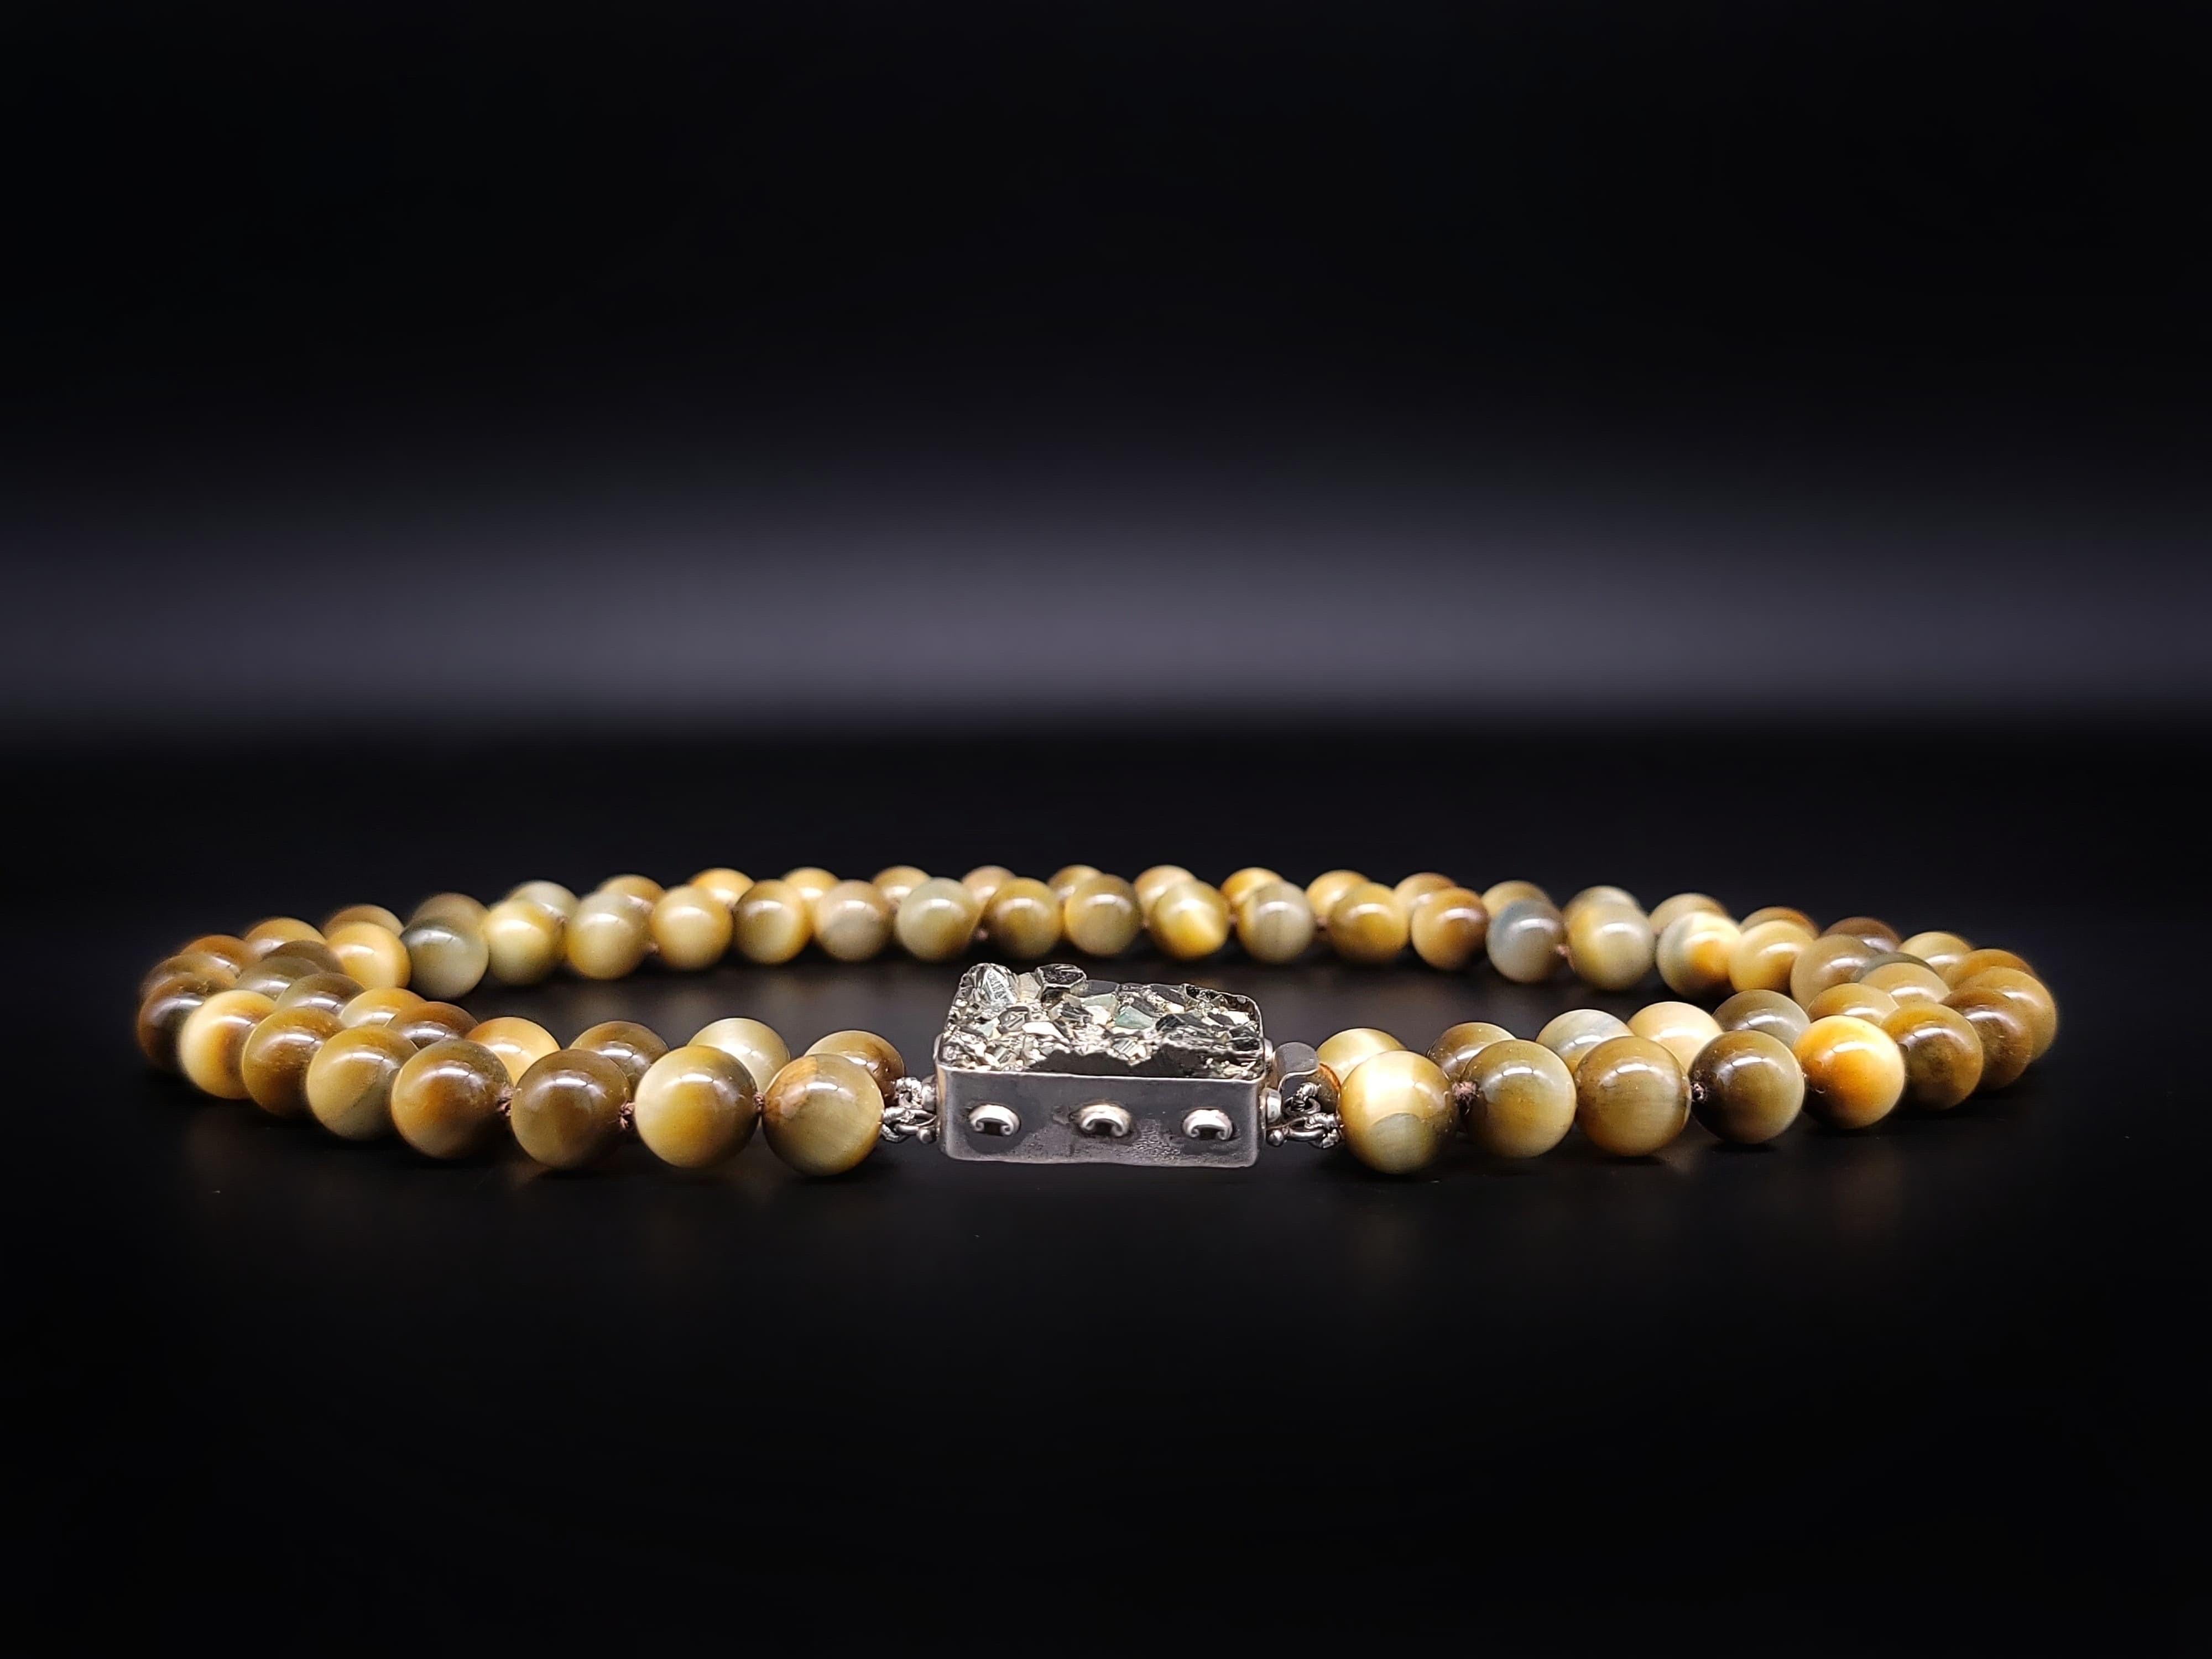 Bead A.Jeschel Honey Tiger’s eye necklace combined with Pyrite clasp. For Sale